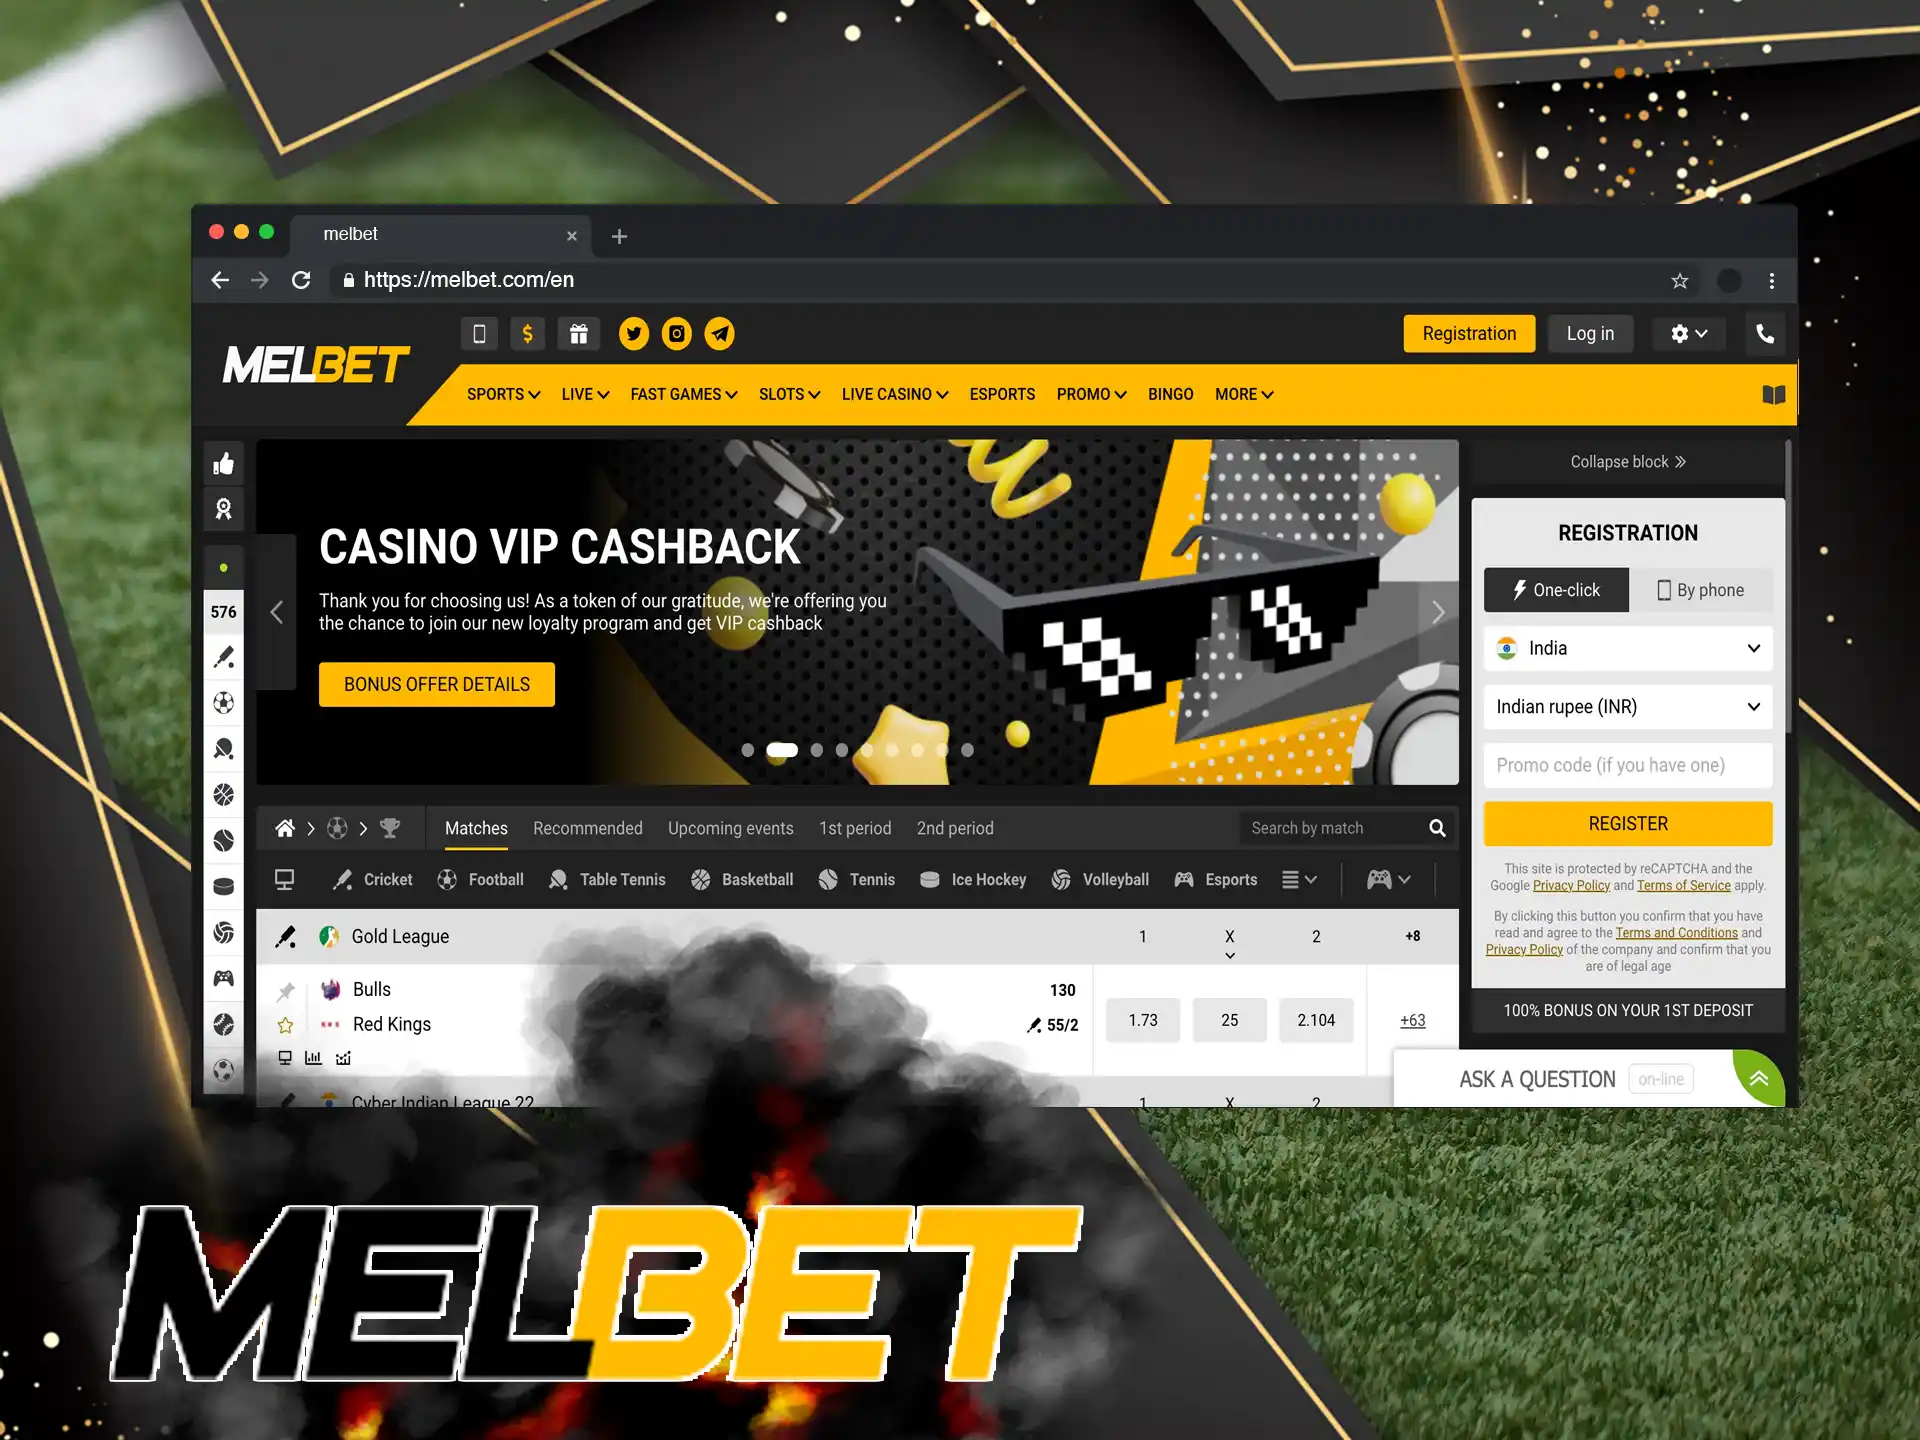 Users from India can easily create an account at Melbet to make bets in real time.